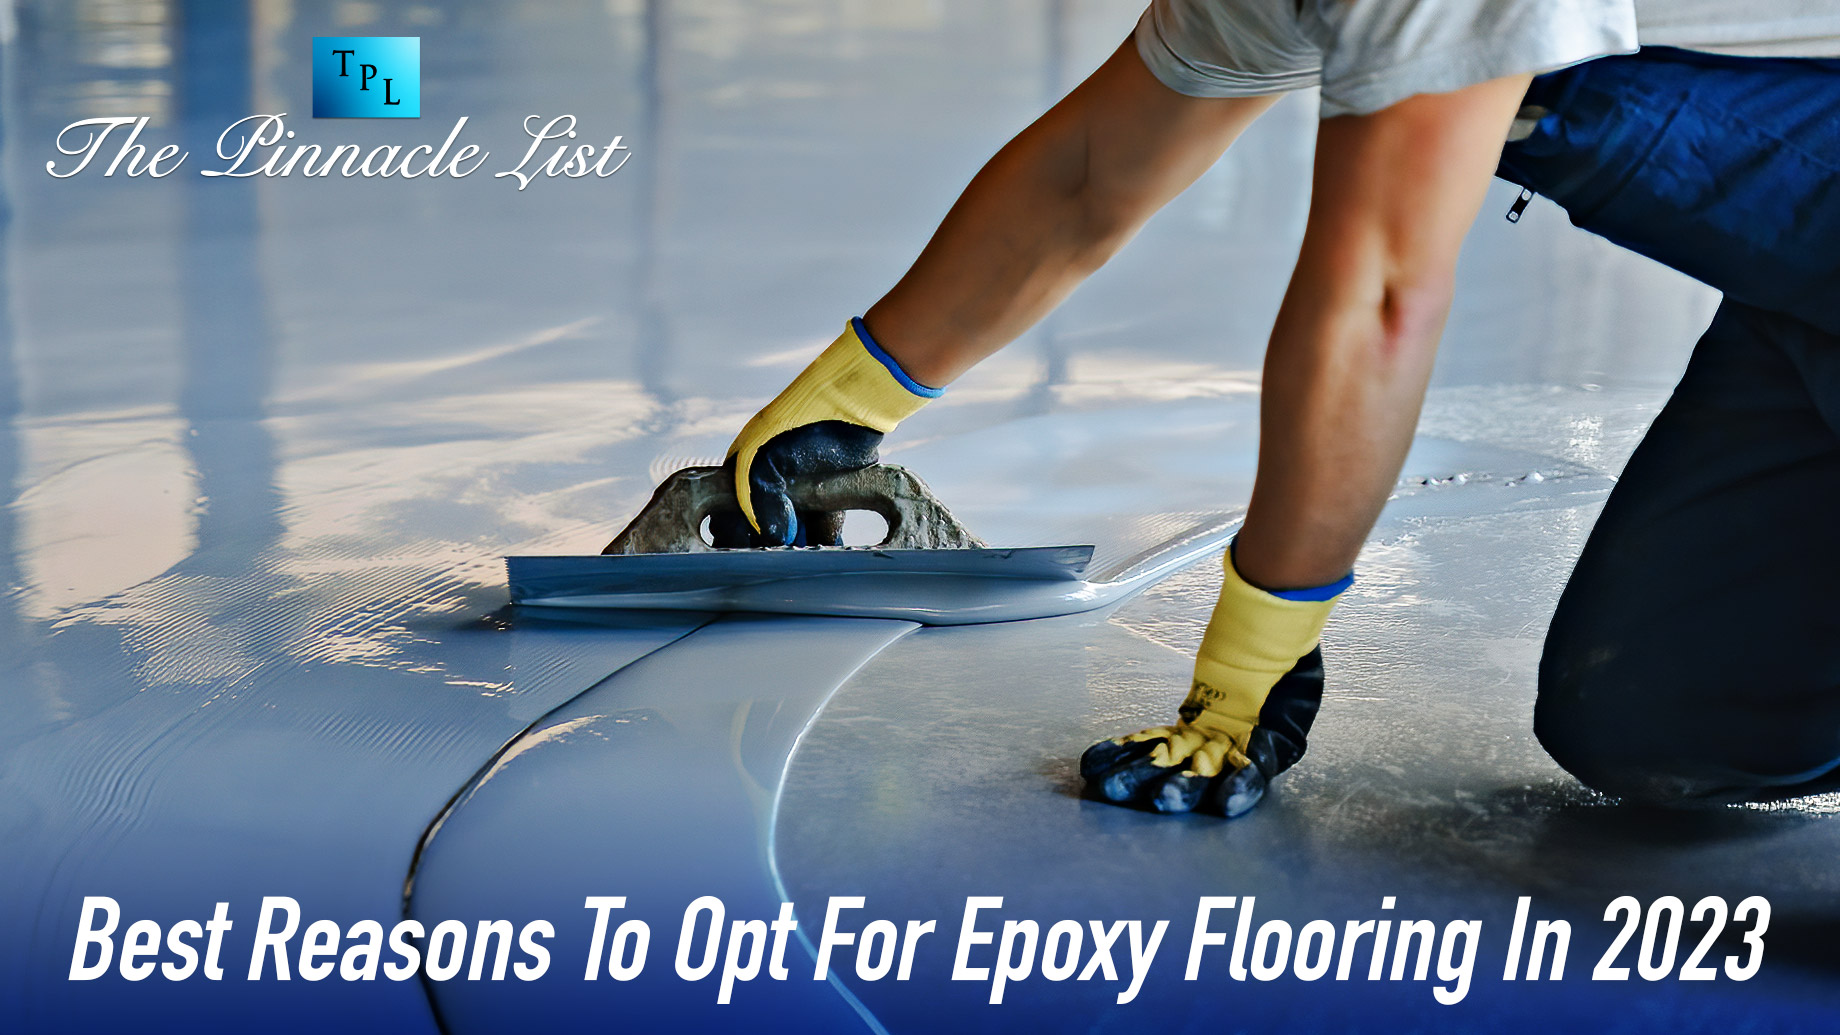 Best Reasons To Opt For Epoxy Flooring In 2023